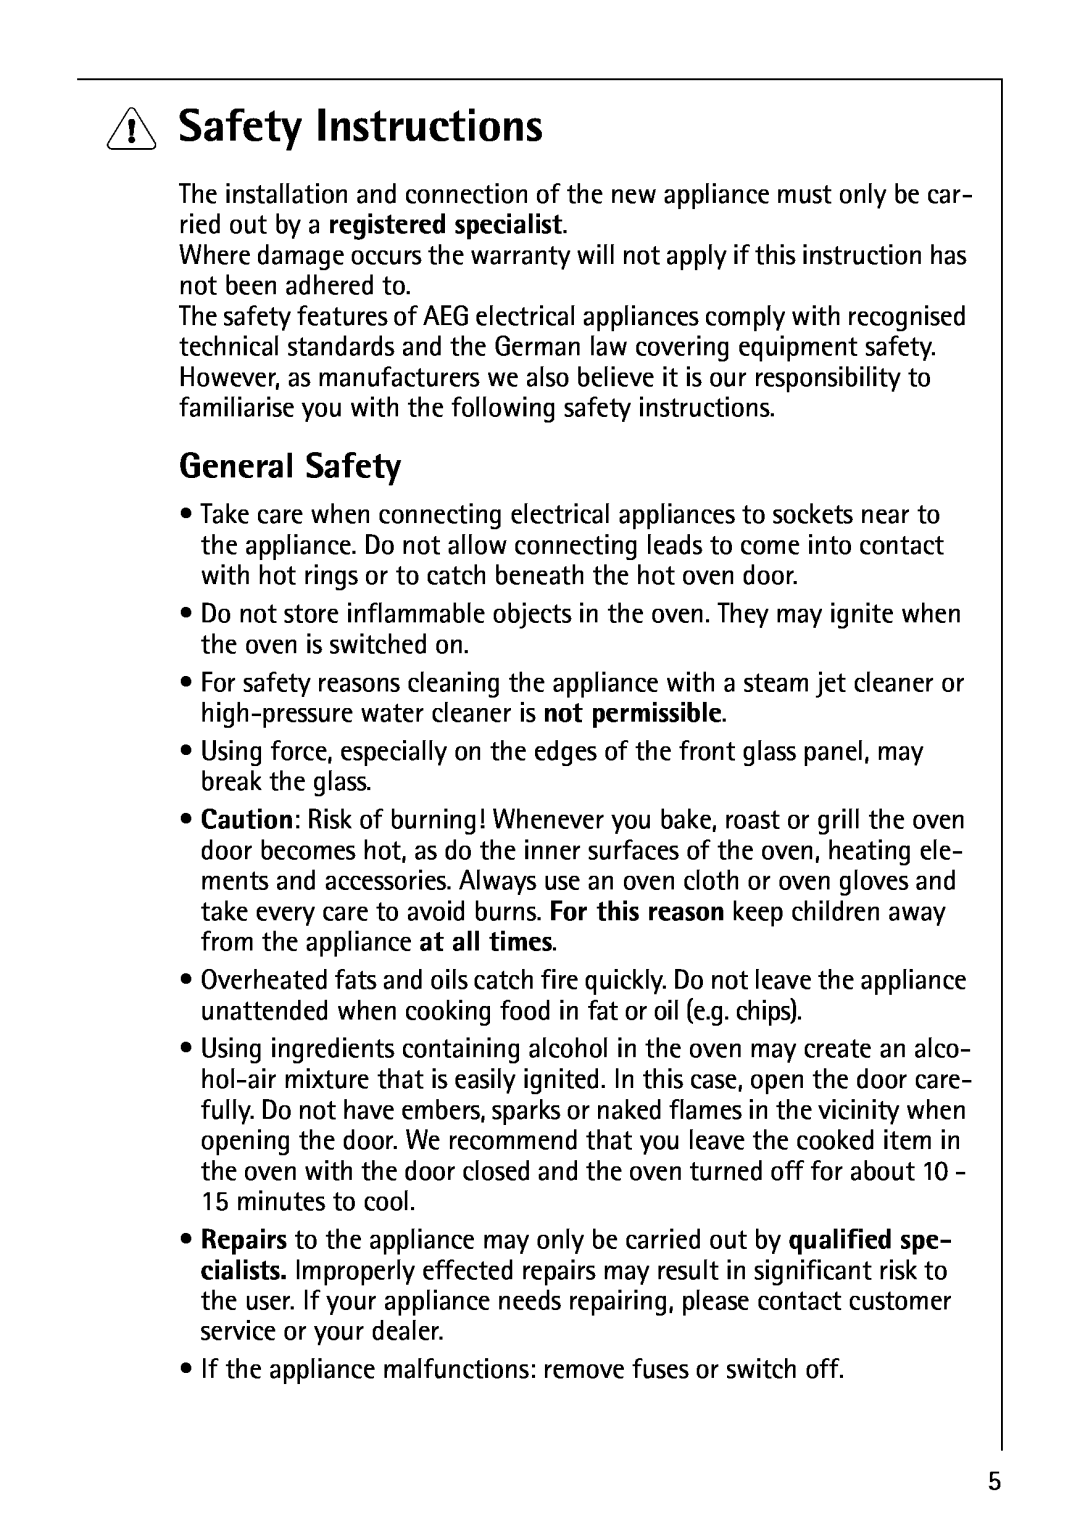 AEG B3040-1 manual 1Safety Instructions, General Safety 